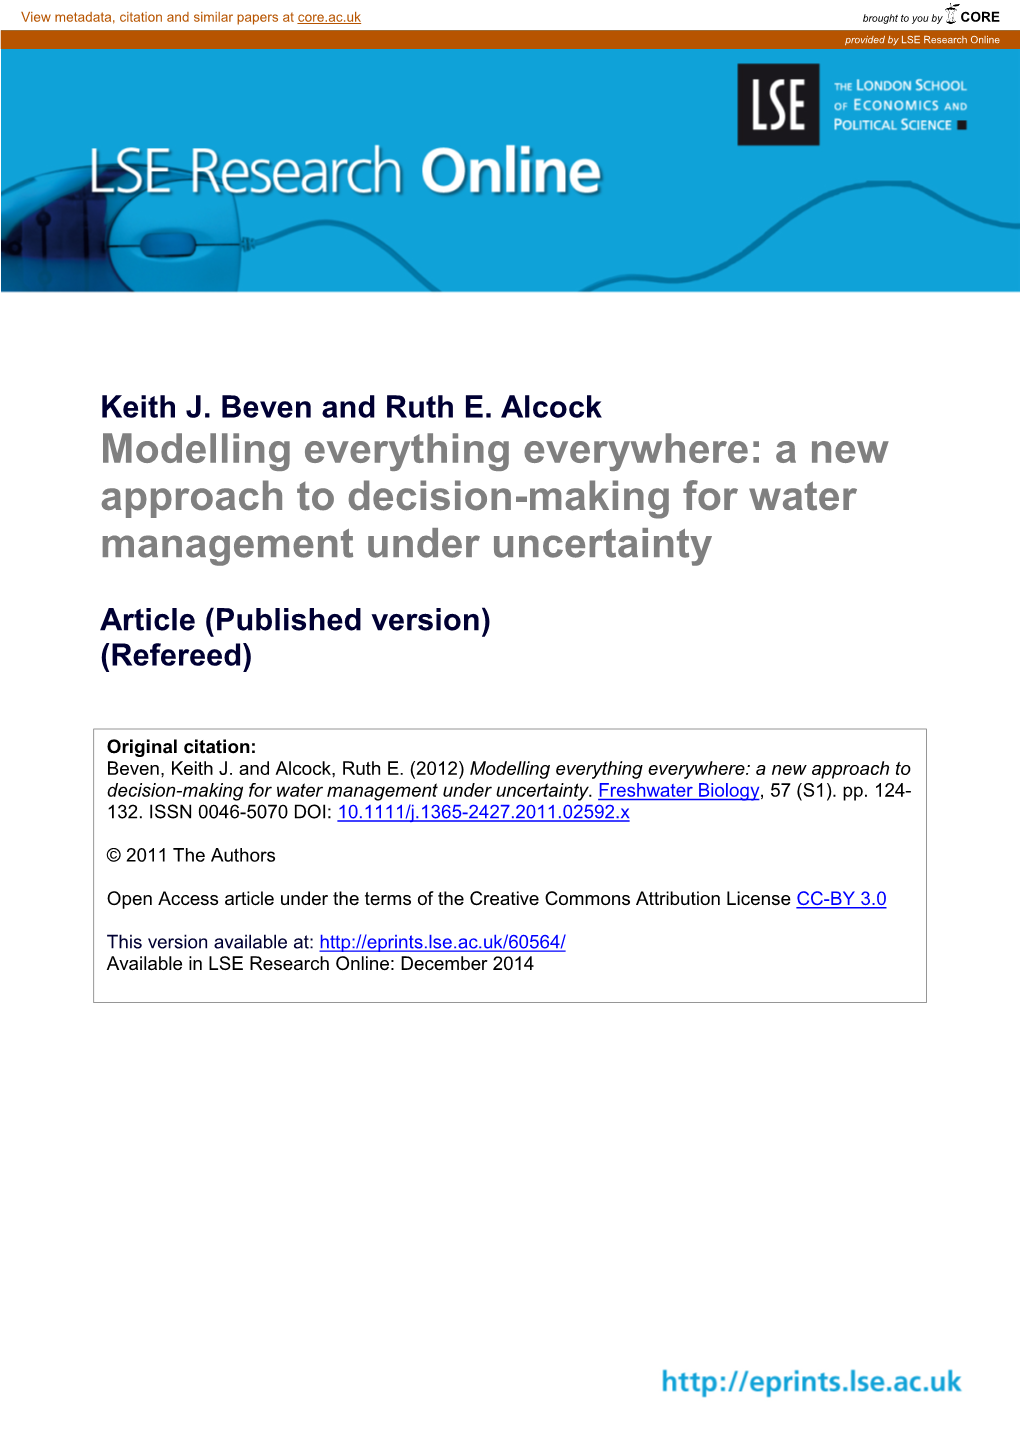 Modelling Everything Everywhere: a New Approach to Decision-Making for Water Management Under Uncertainty